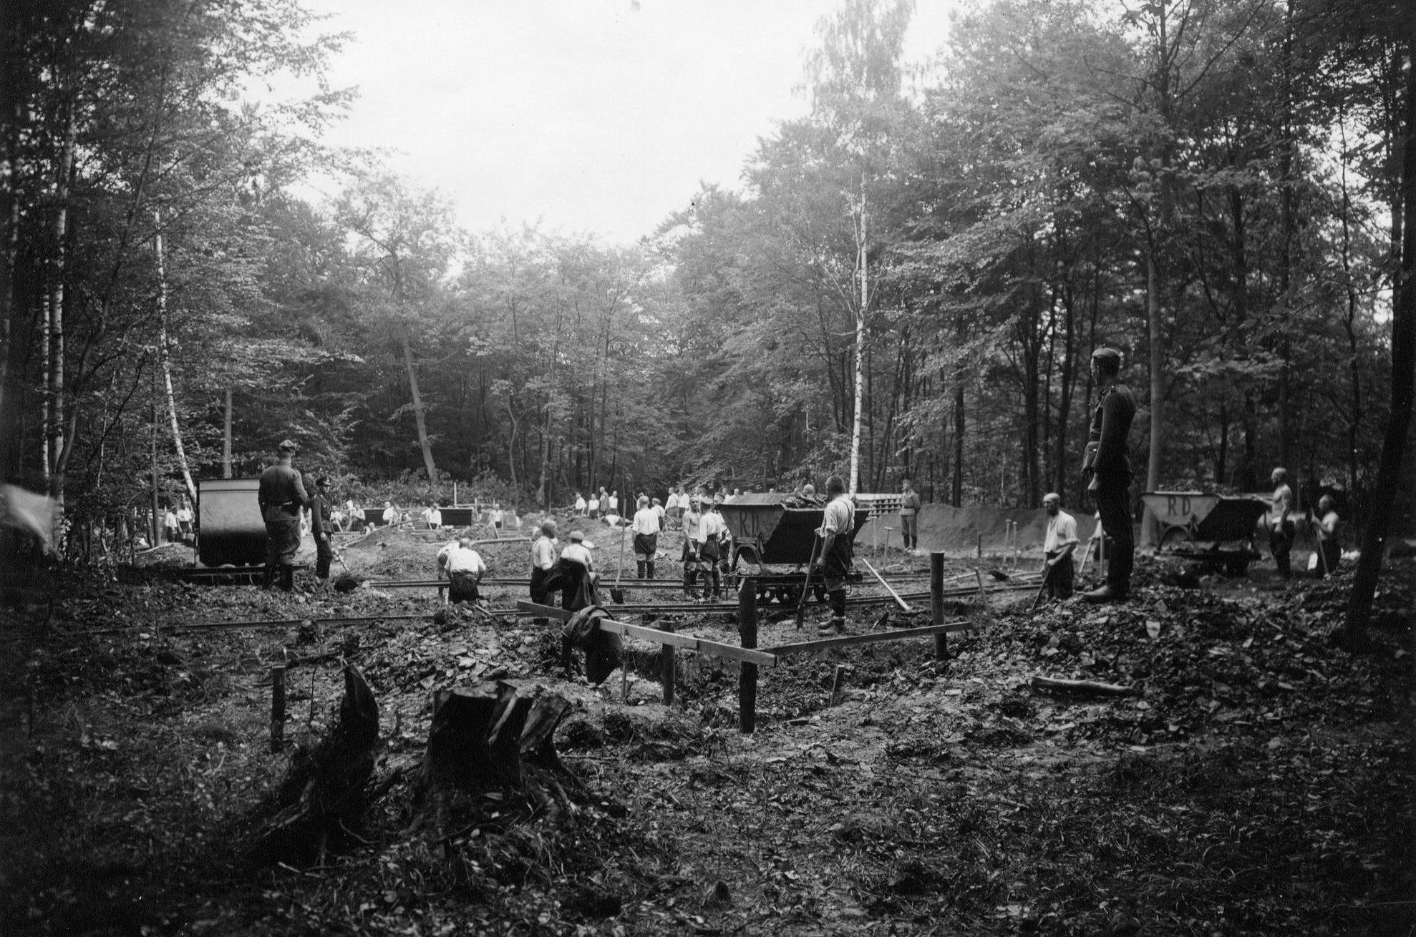 Under the supervision of SS guards, prisoners dig amid tall trees.